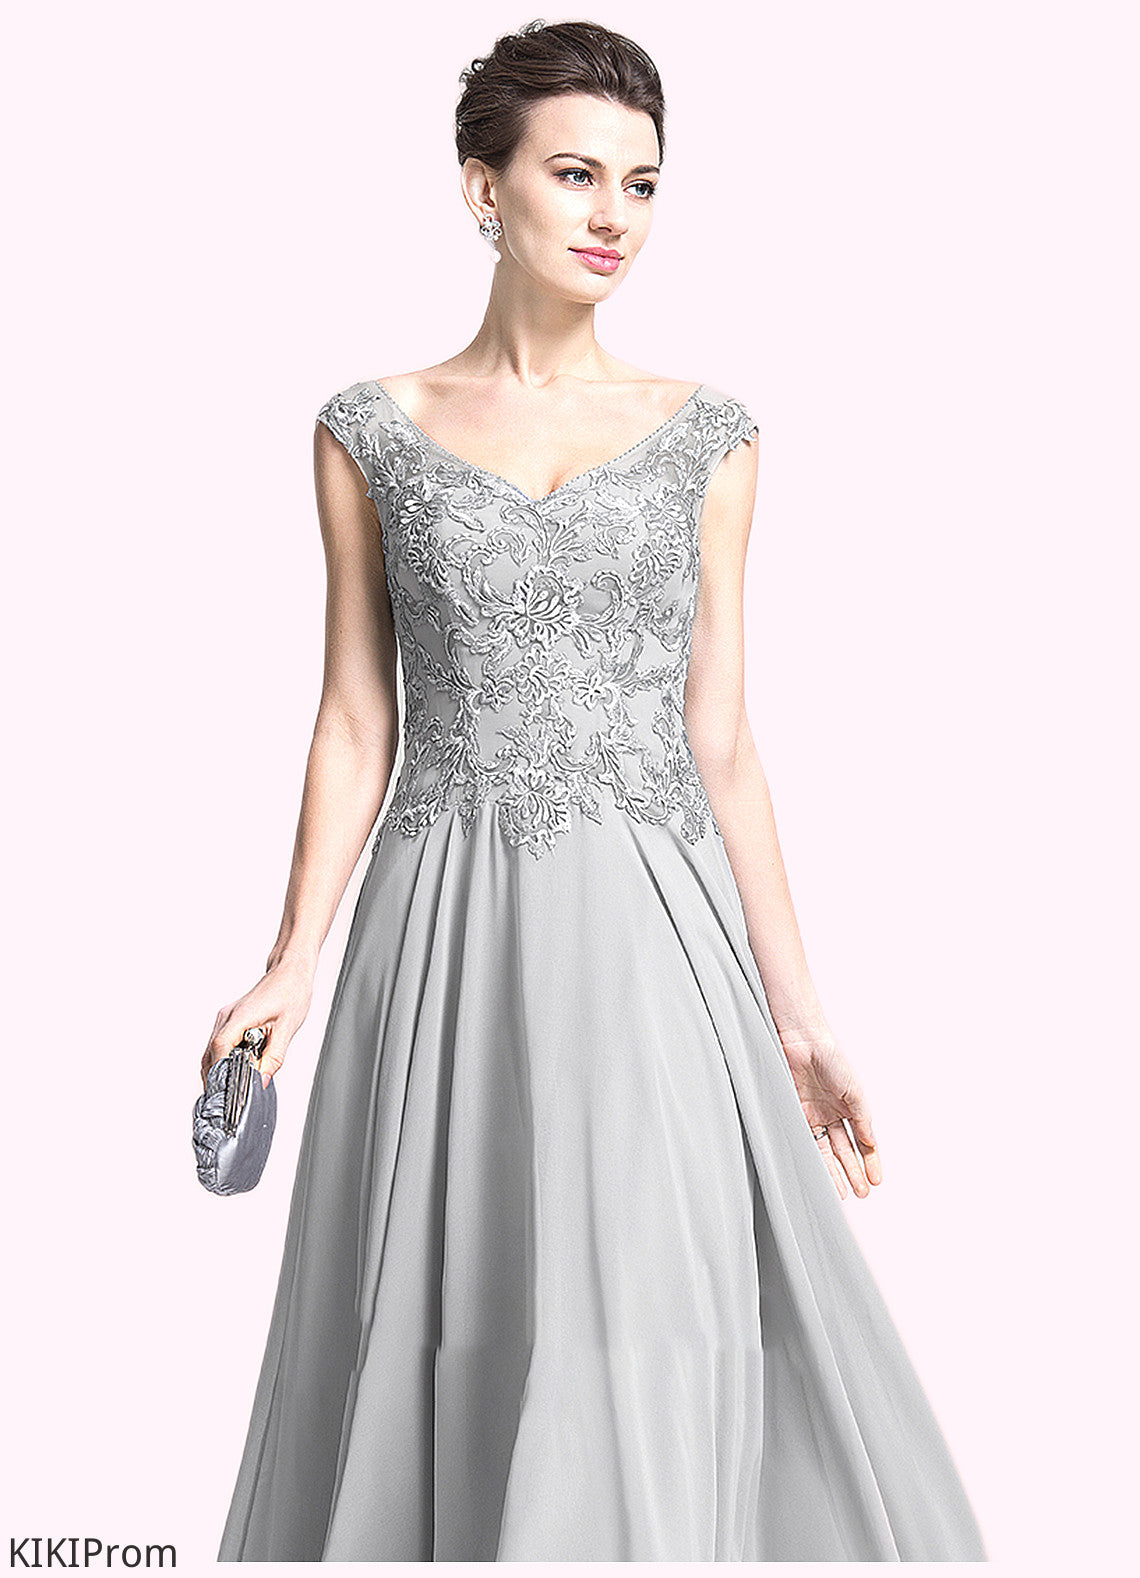 Anna A-Line V-neck Floor-Length Chiffon Mother of the Bride Dress With Appliques Lace DZ126P0014974